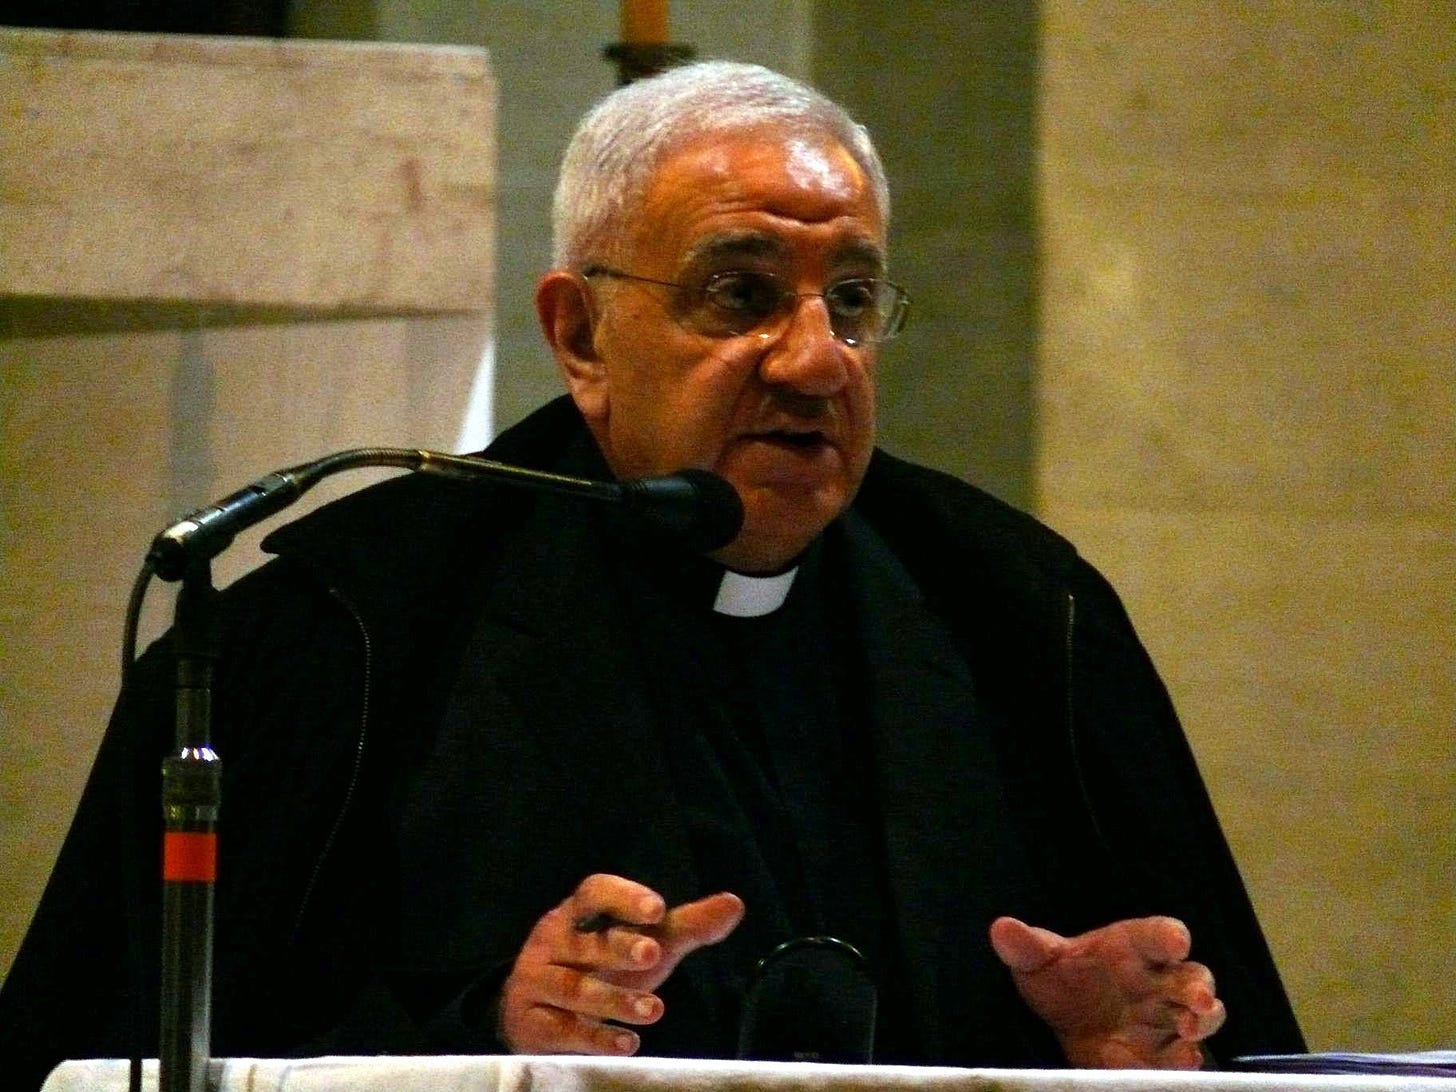 Vatican priest advisor on sexuality barred from priestly ministry